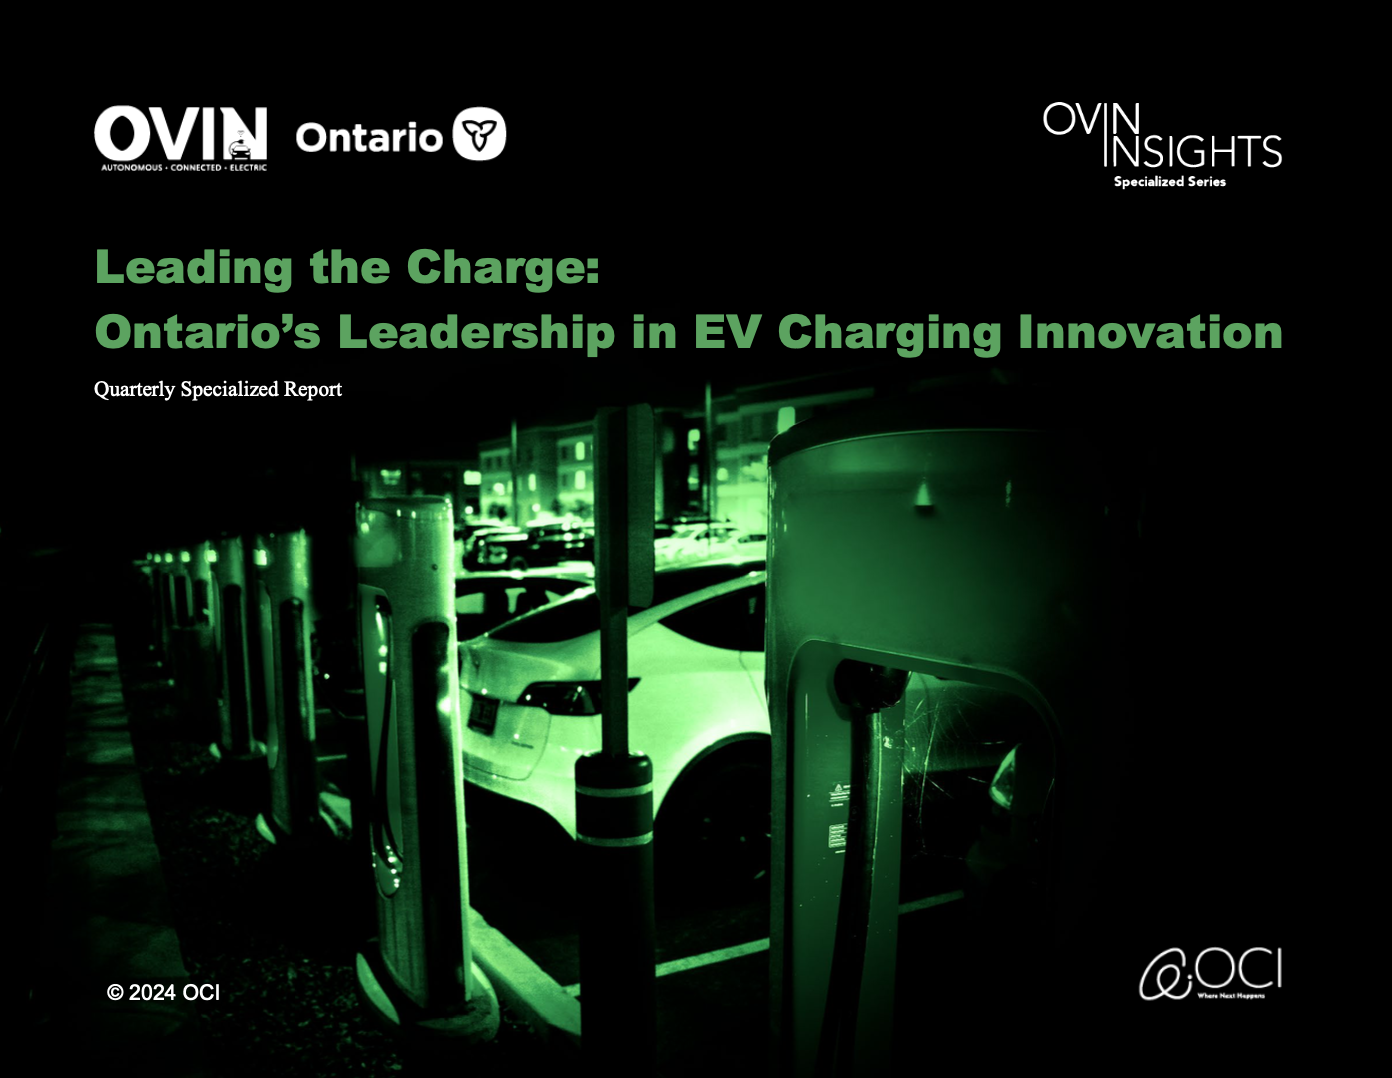 Leading the Charge: Ontario’s Leadership in EV Charging Innovation